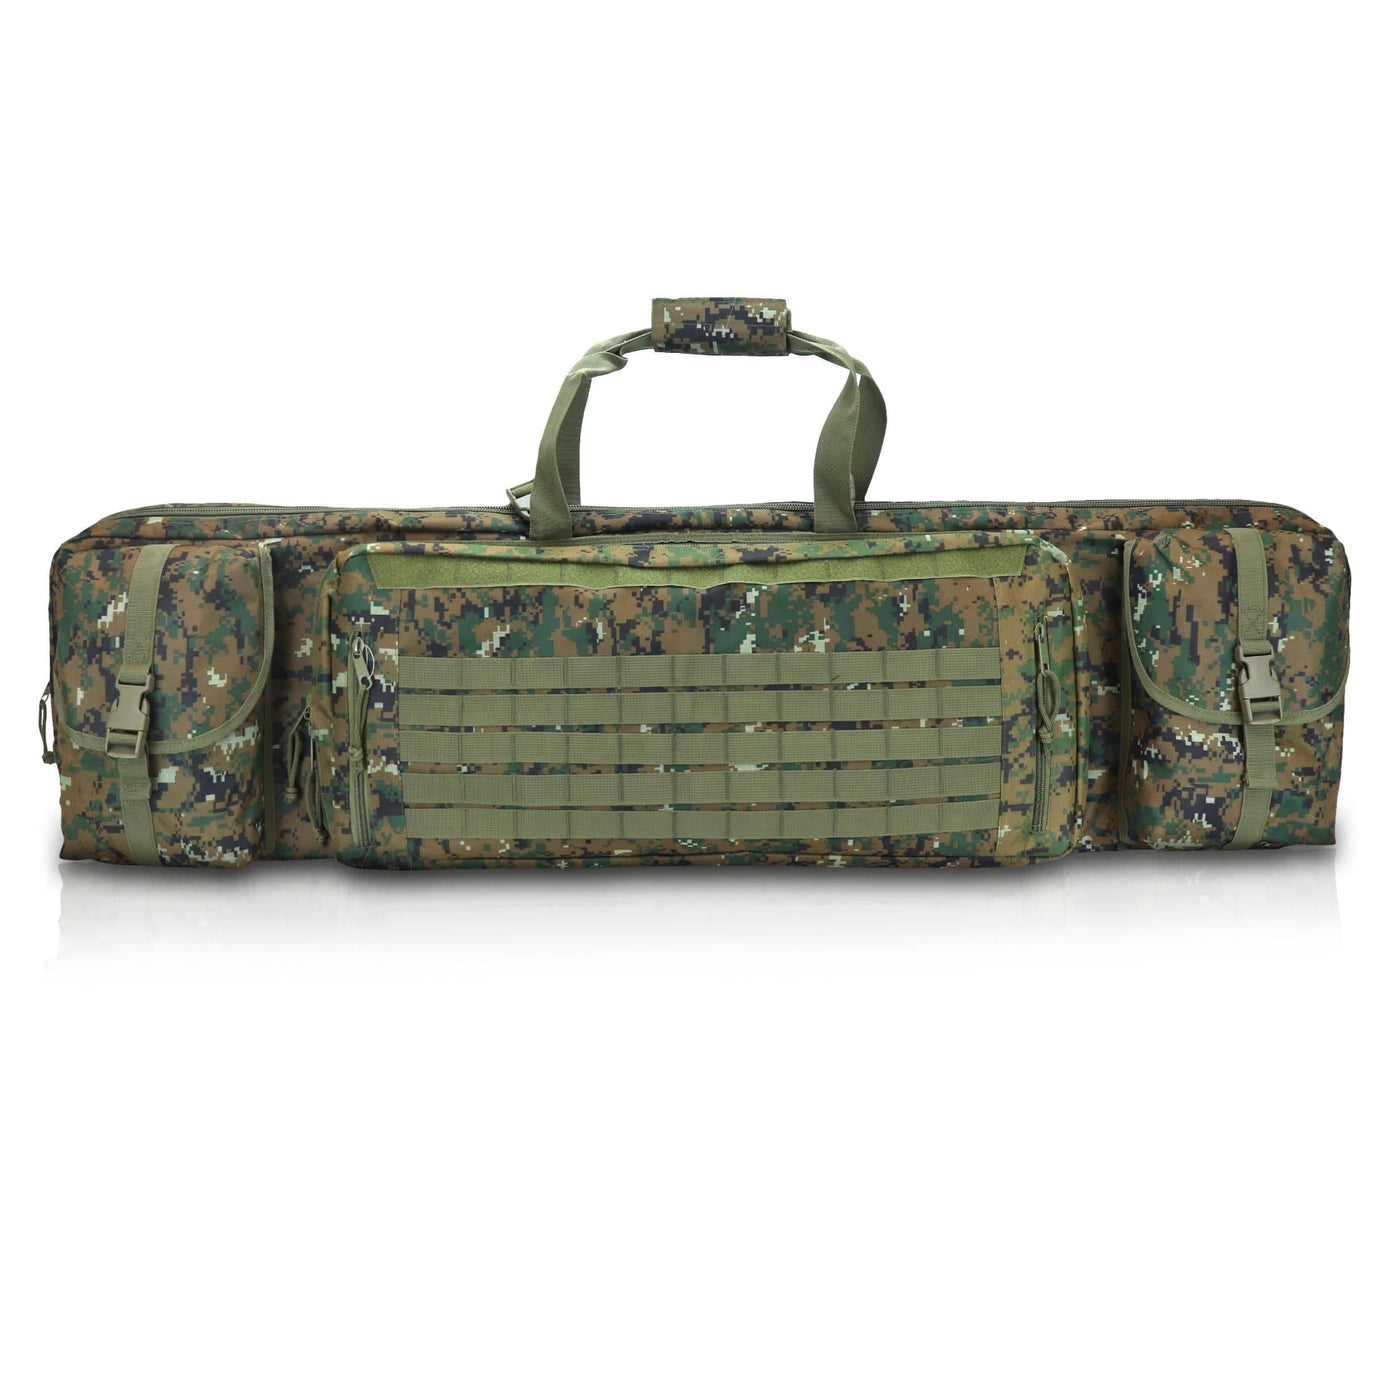 Osage River Osage River 42 in Double Rifle Case Green Digital Camo Shooting